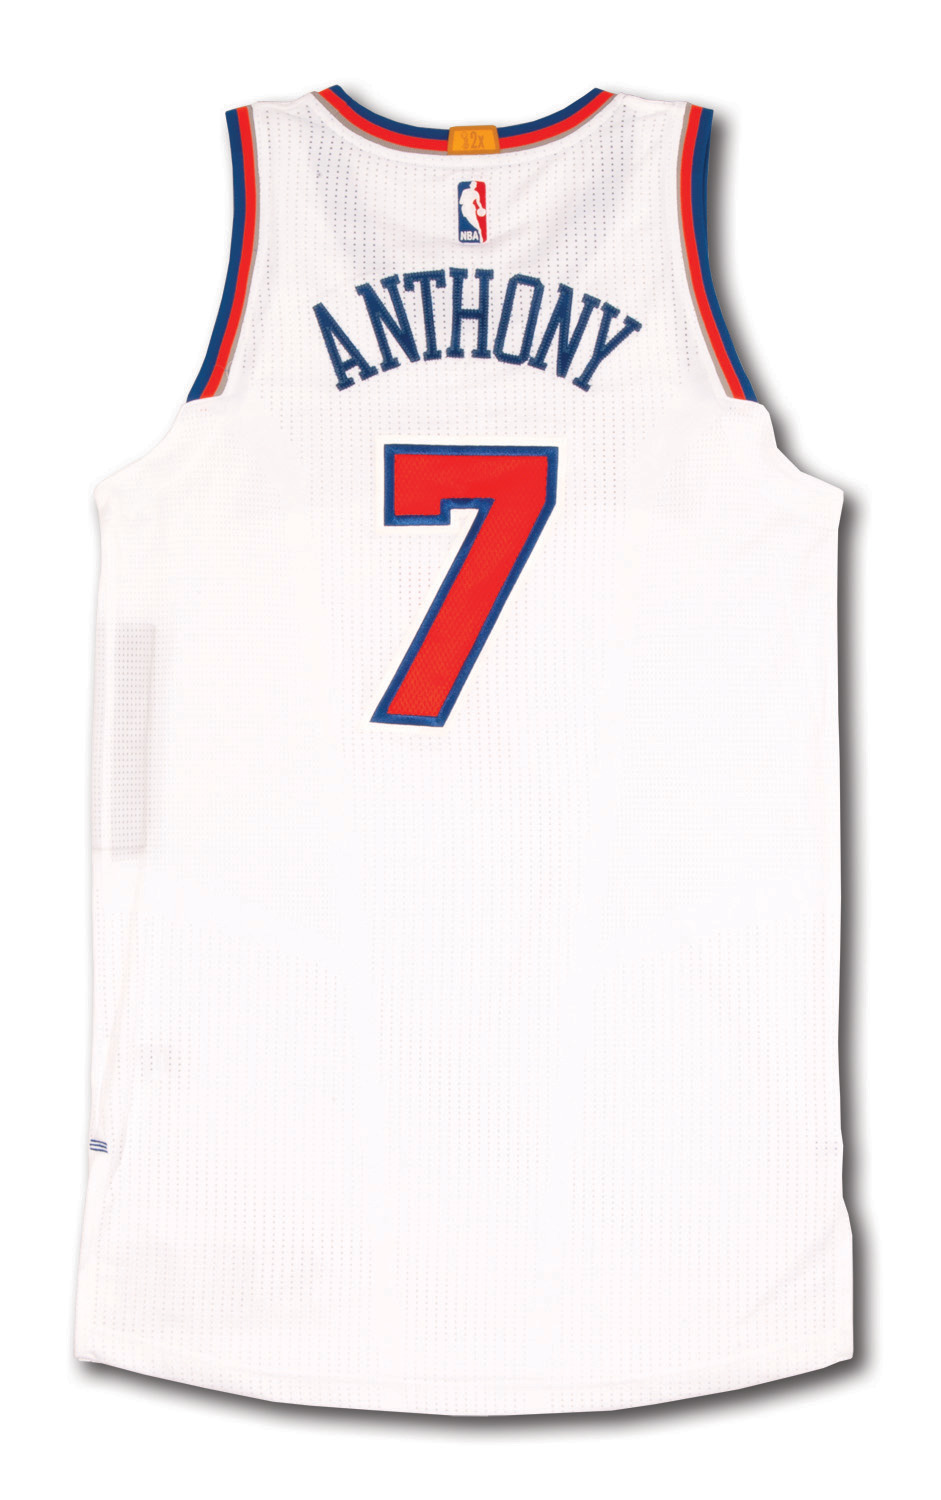 Carmelo Anthony - New York Knicks - Game-Worn Jersey - Kia NBA Tip-Off '15  - First Half Only